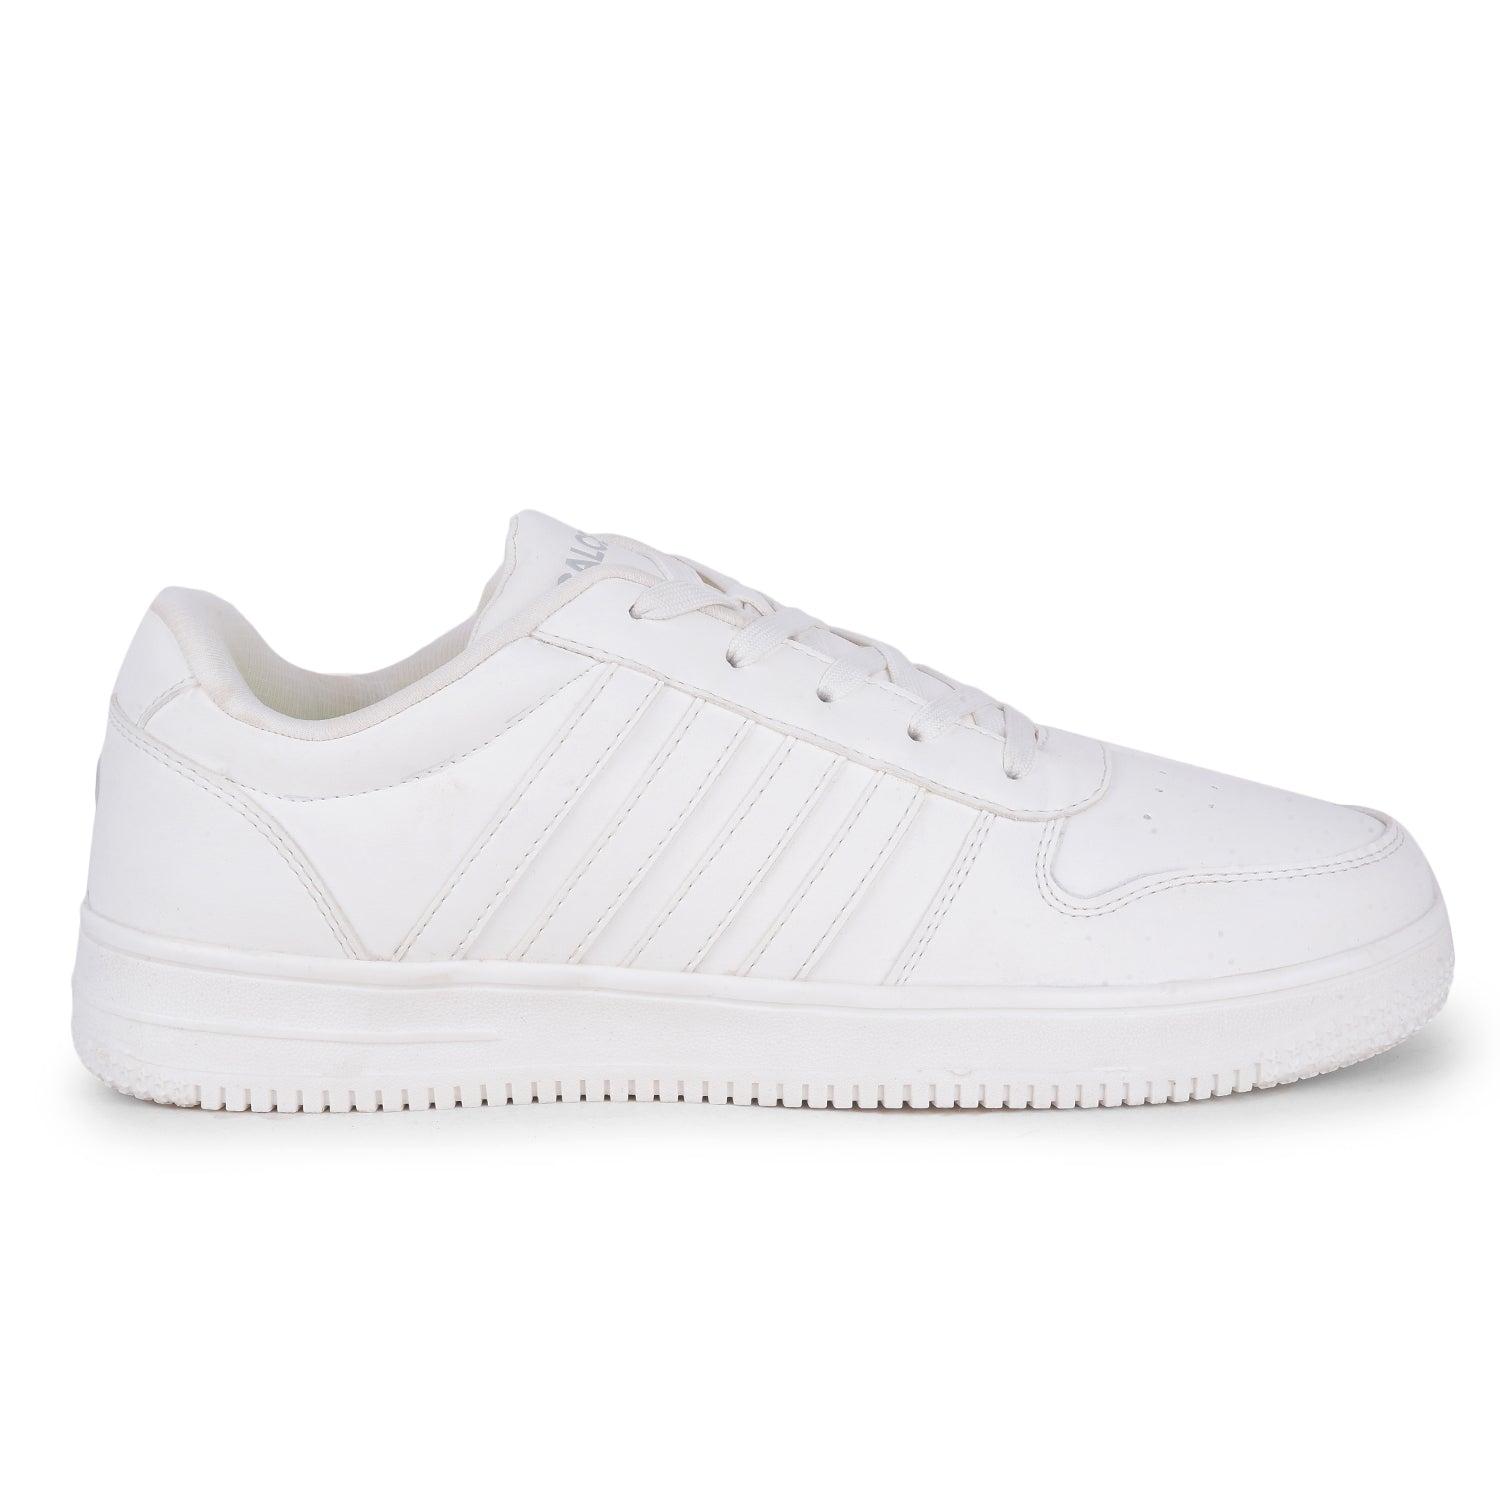 Casual shoes for women | Wave Rider white sneakers | Bacca Bucci